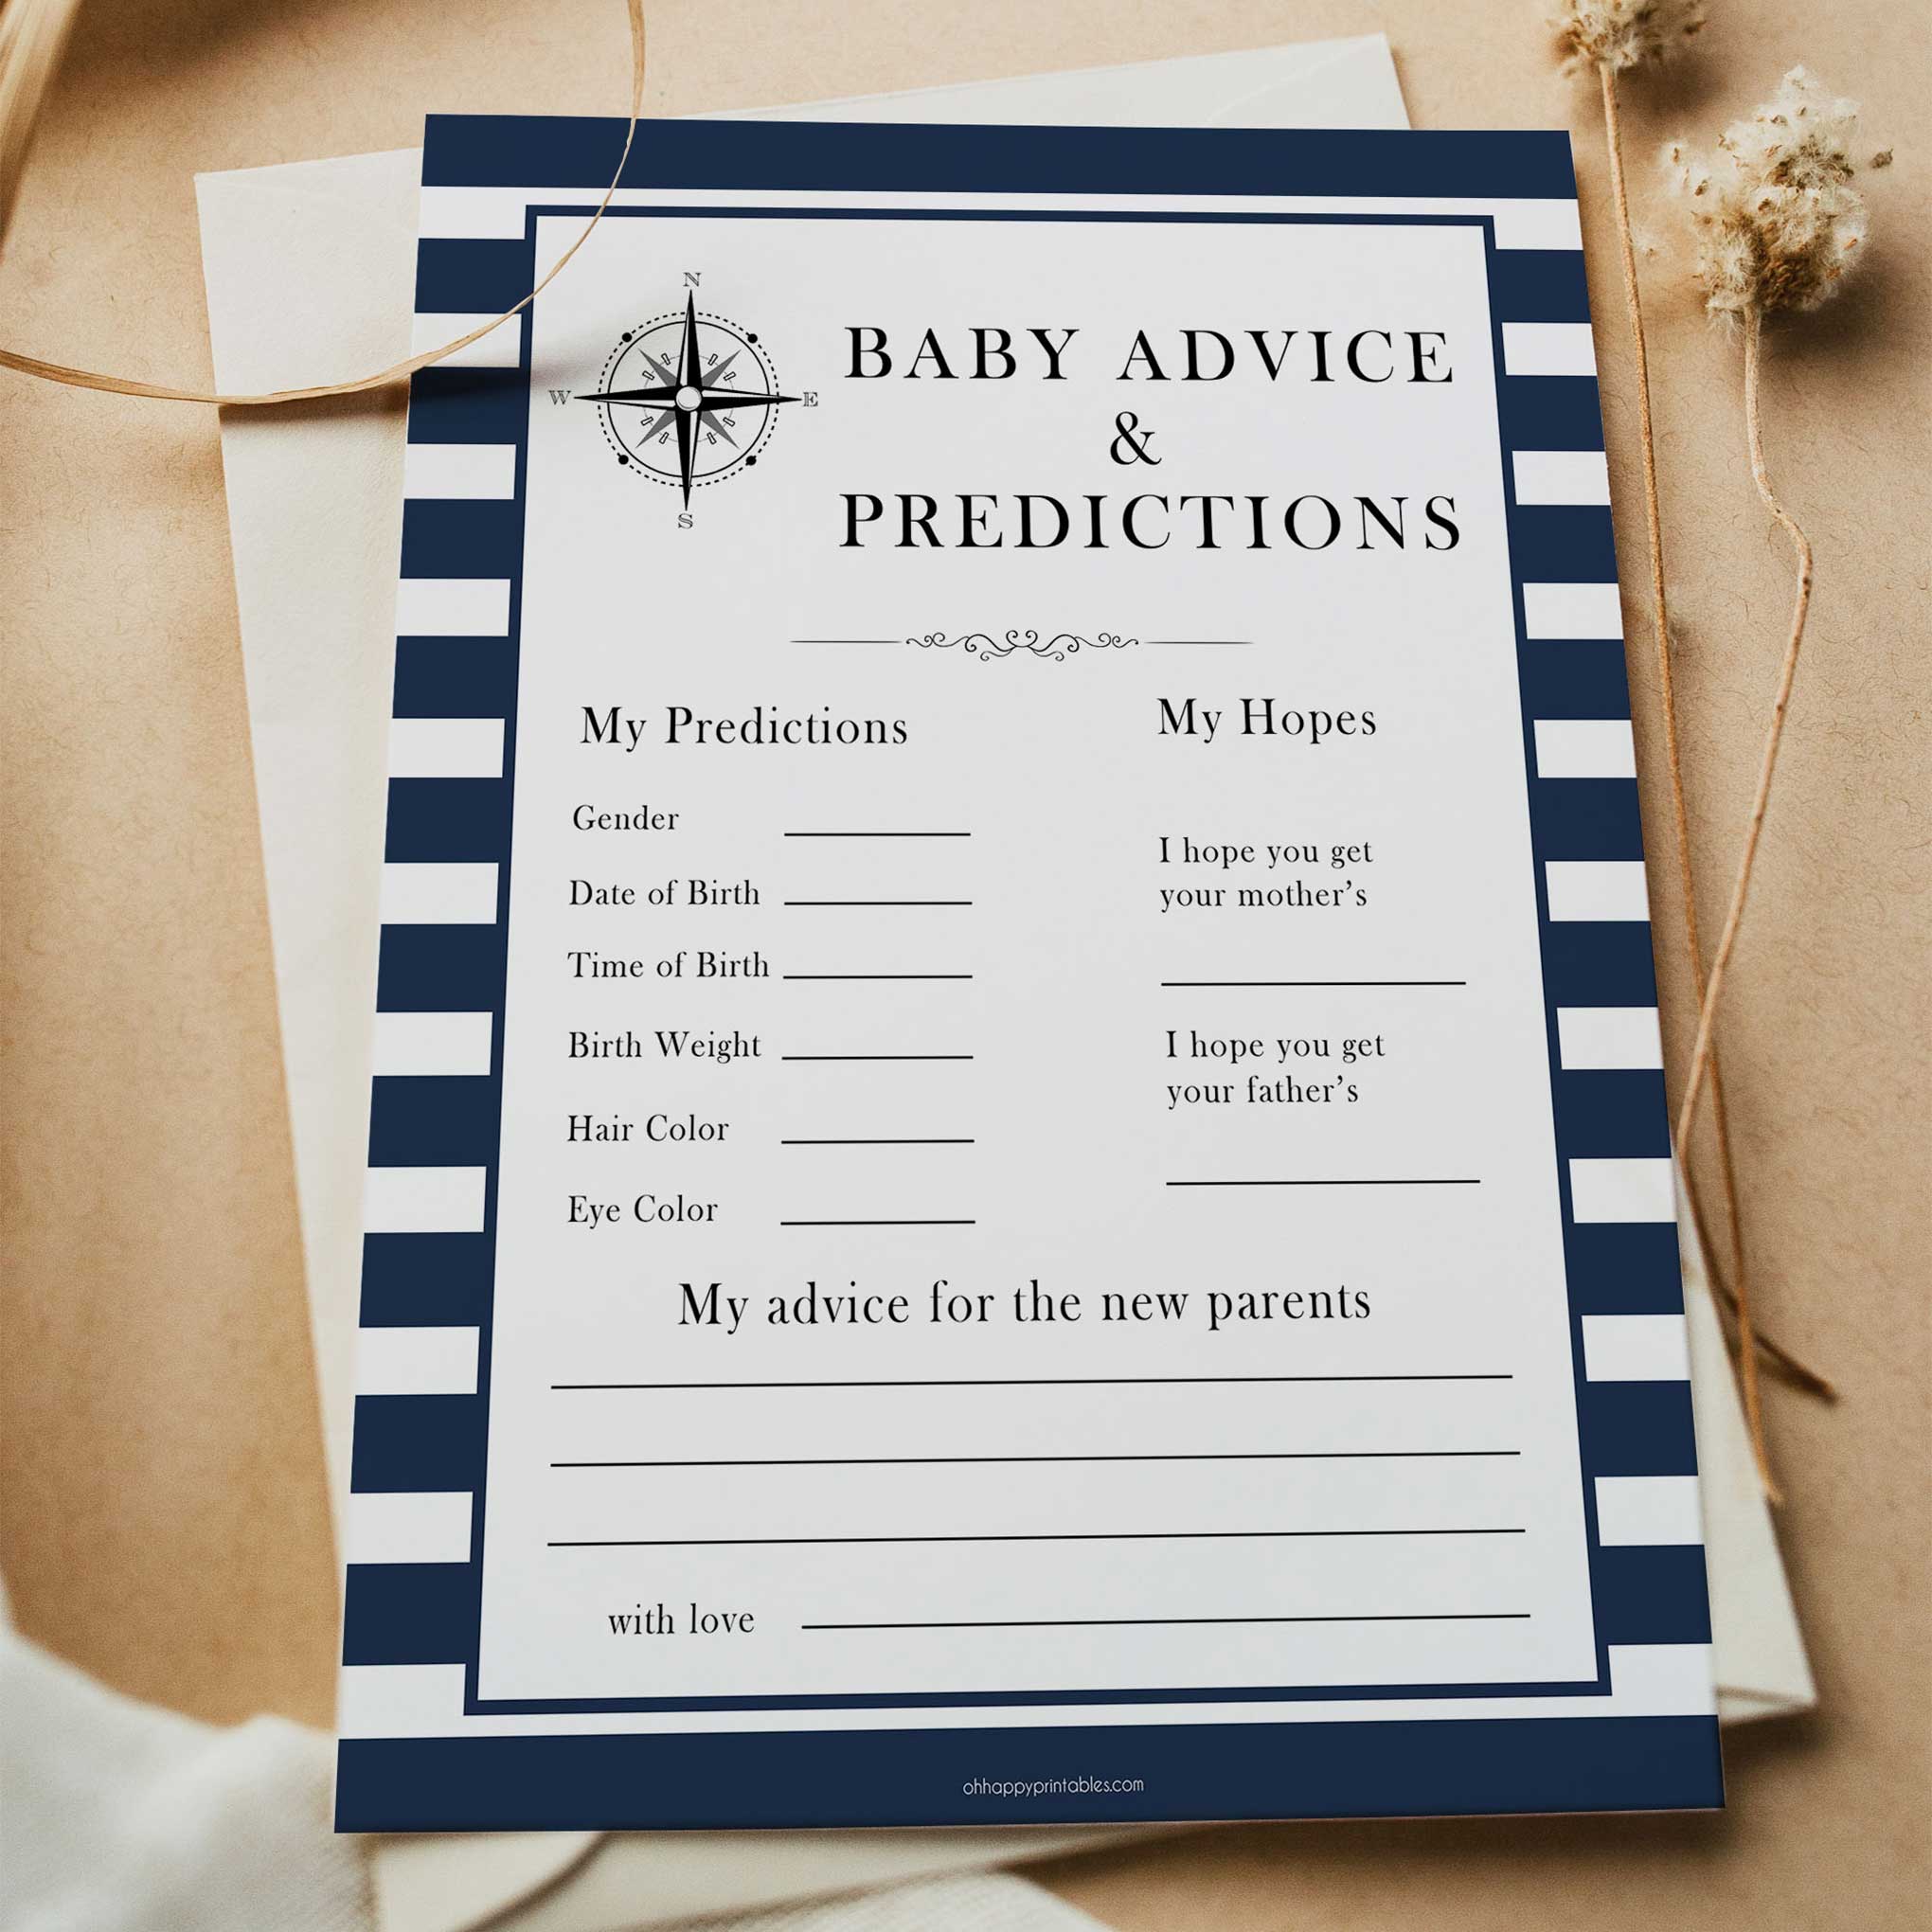 Nautical baby shower games, baby advice and predictions baby shower games, printable baby shower games, baby shower games, fun baby games, popular baby shower games, sailor baby games, boat baby games